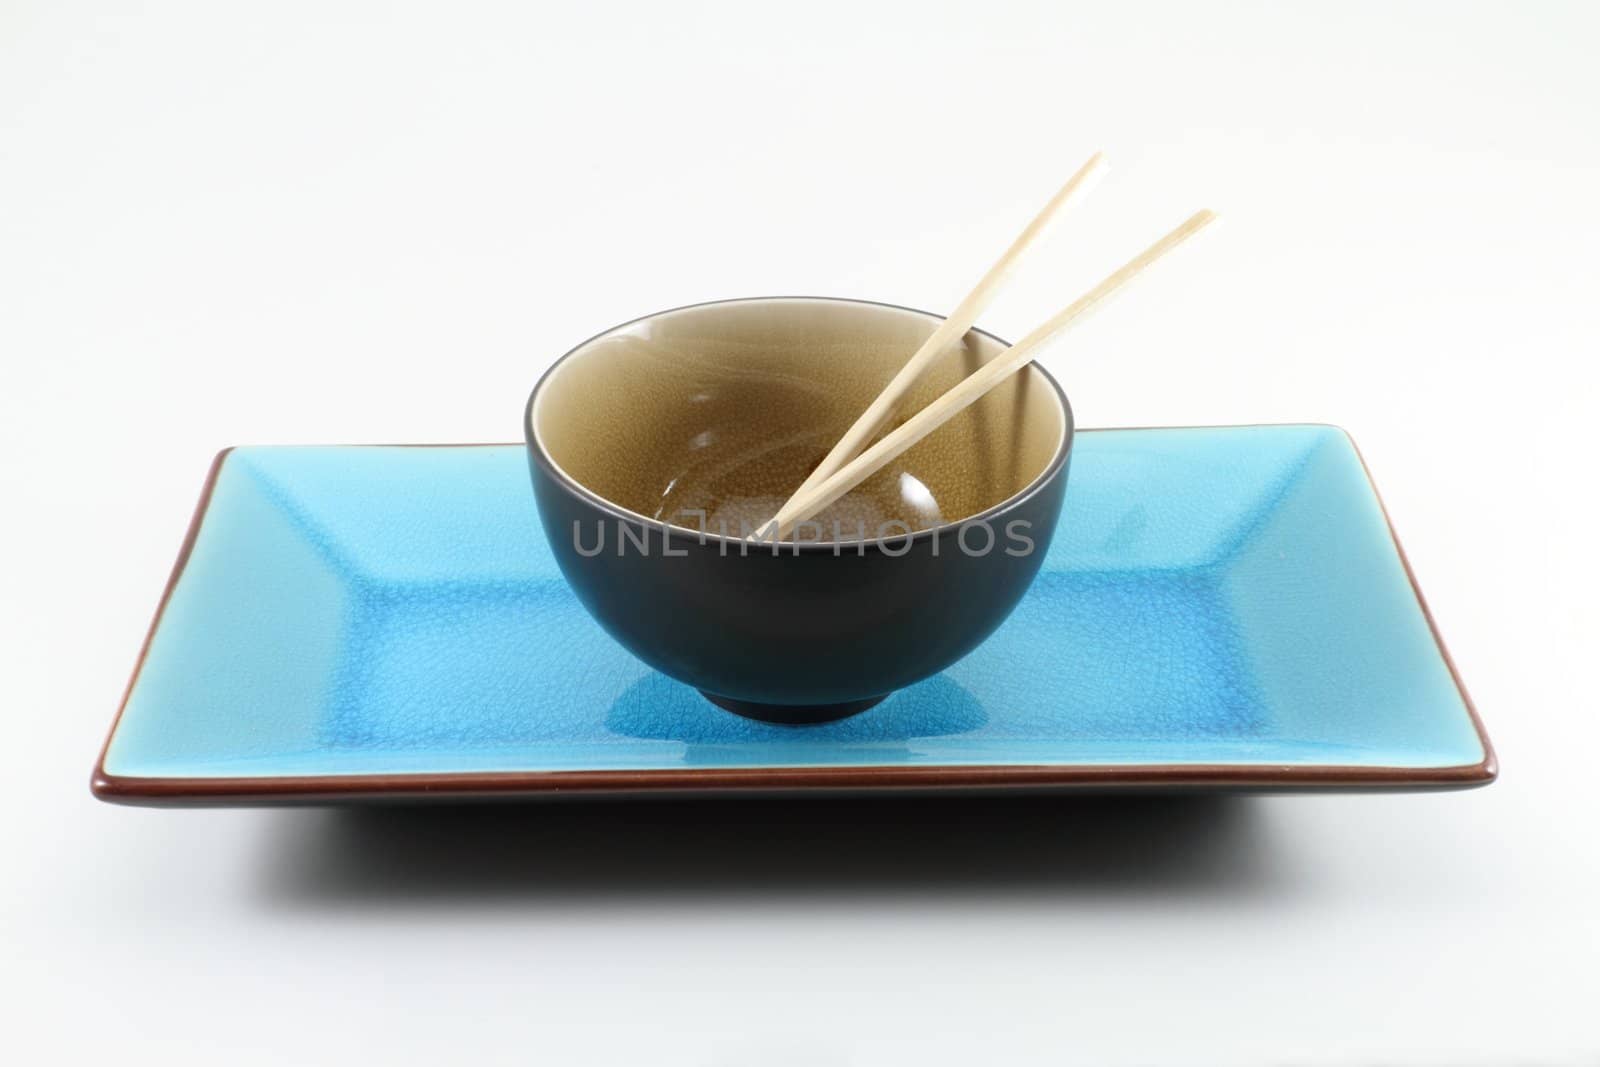 Traditional oriental table setting with chopsticks, rice bowl, and plate.